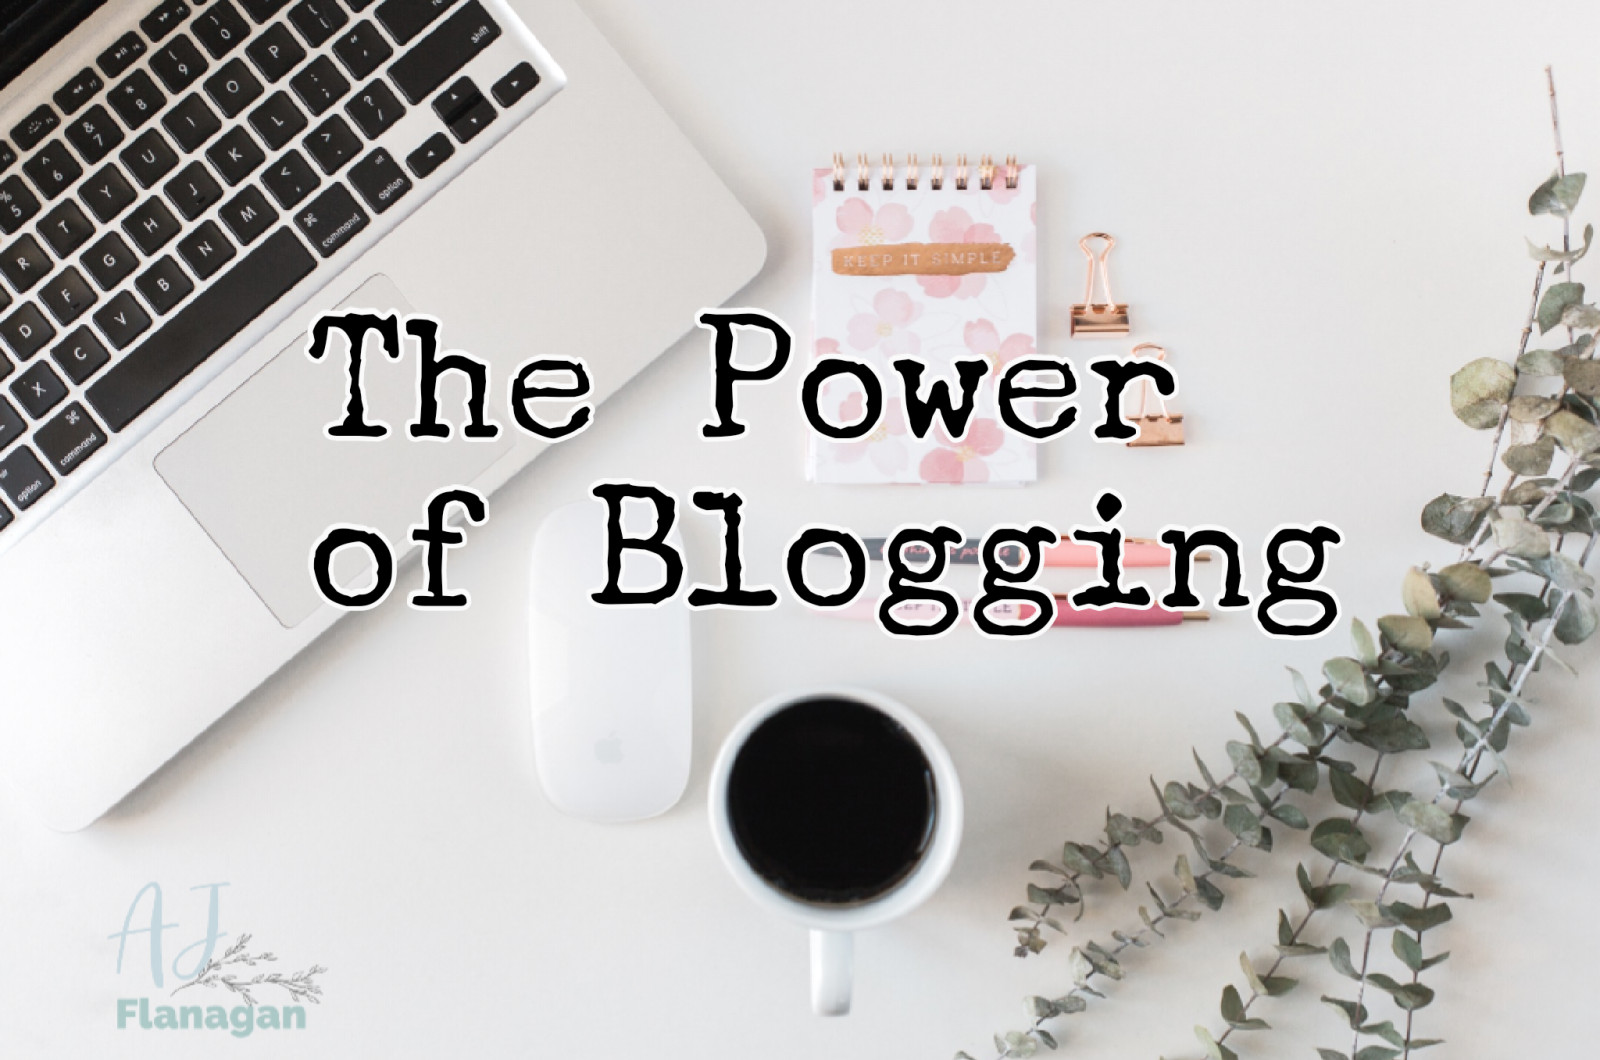 The Power of Blogging: Why it's a Sustainable Approach for Network Marketing Business Growth